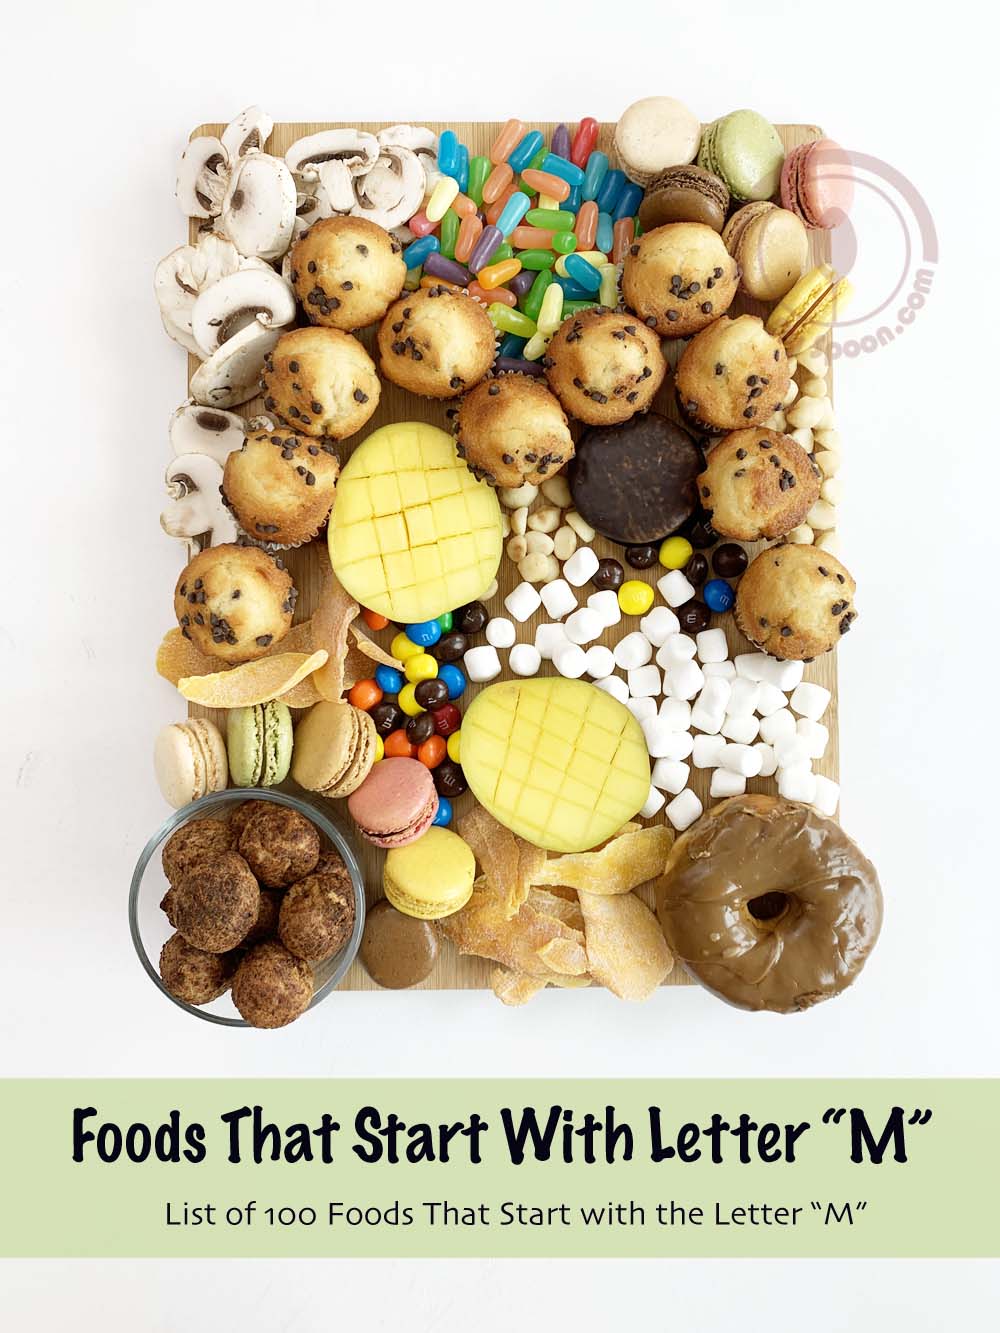 ABC Letter charcuterie board-foods that start with letter M